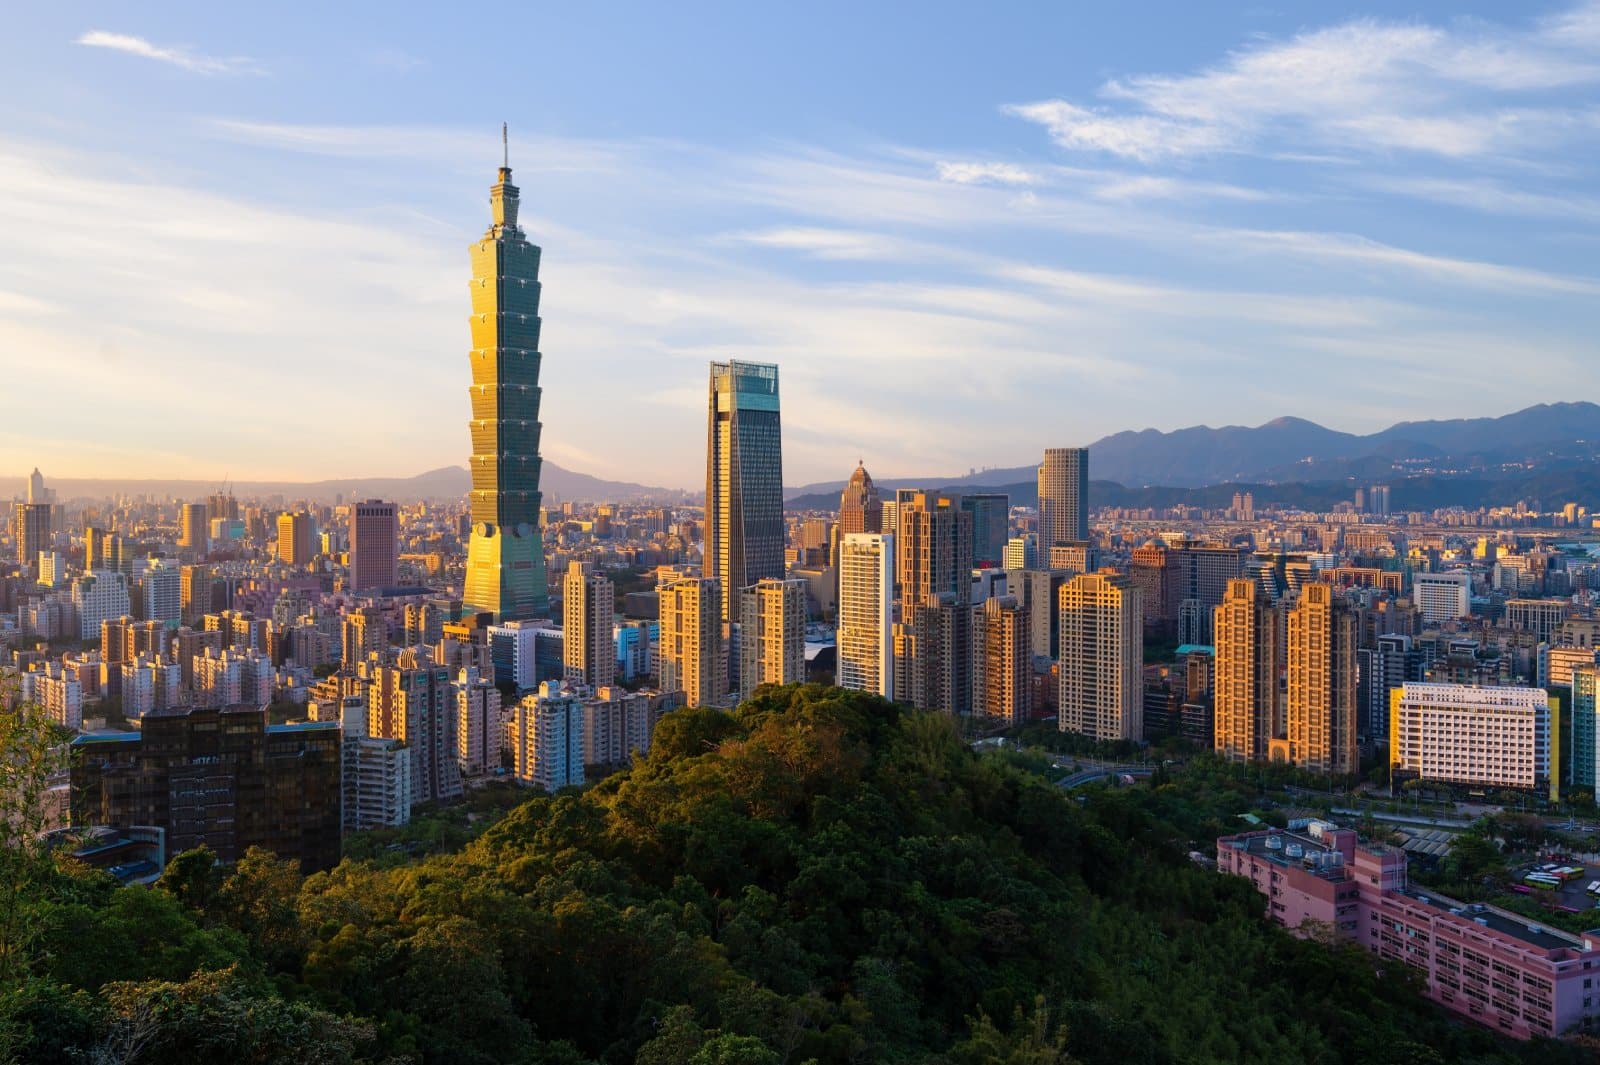 <p>Taipei is known for its safe environment, efficient public transport, and a blend of modern and traditional lifestyles, making it an emerging spot for digital nomads.</p>